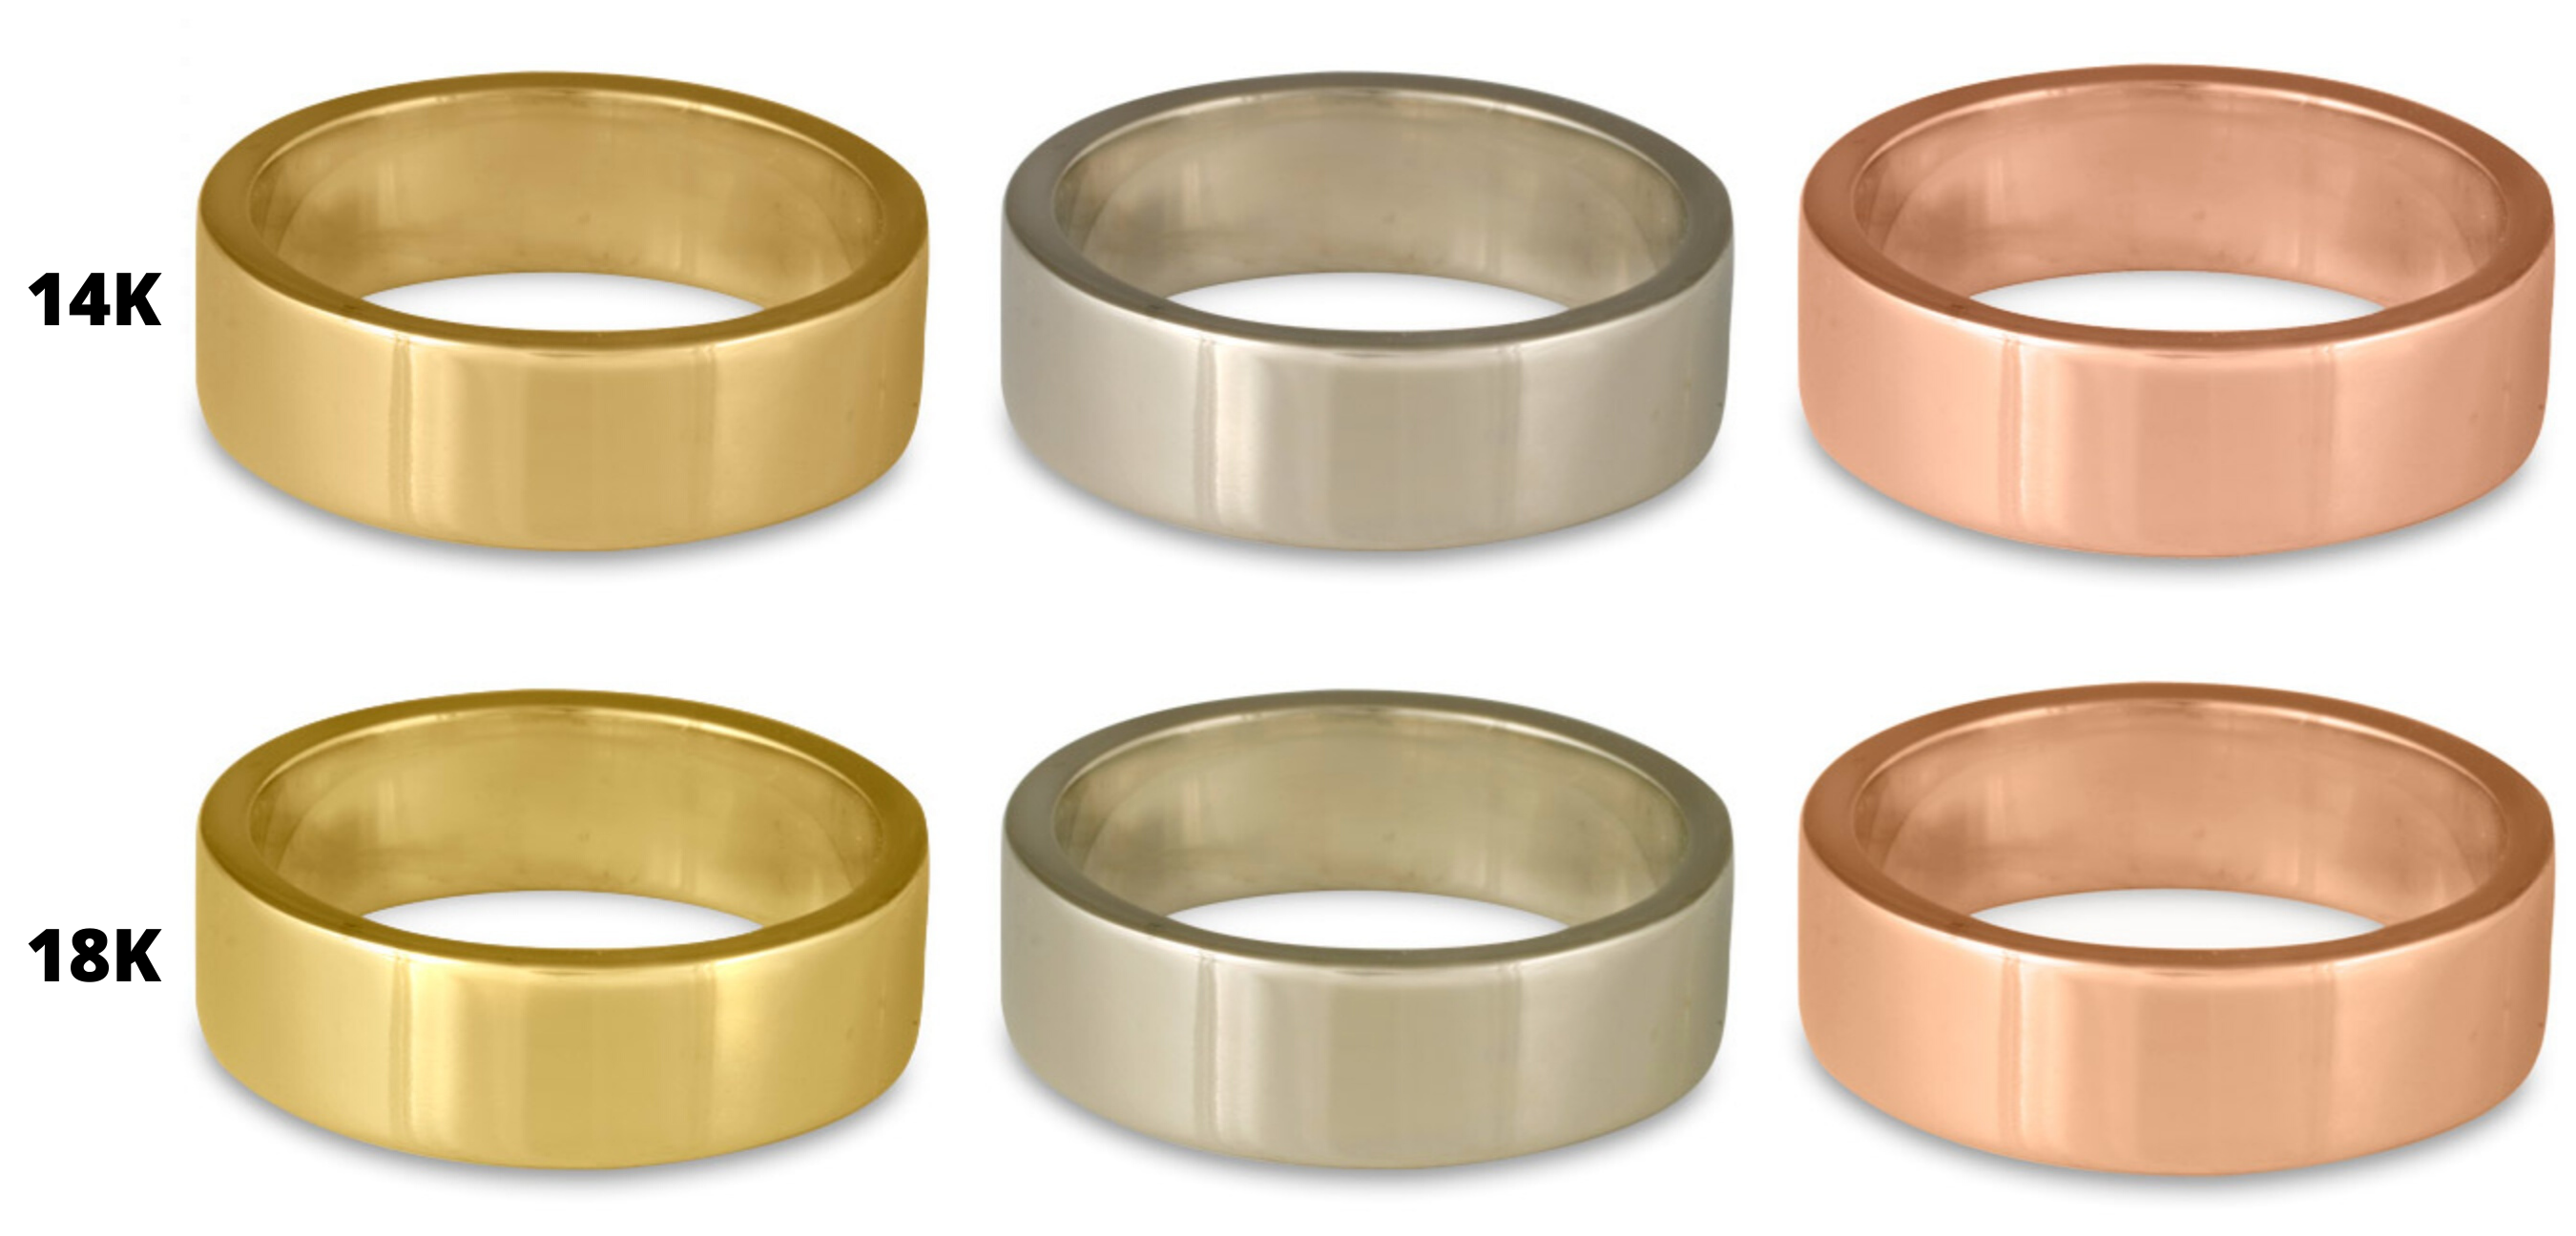 A comparison of 18K and 14K white, yellow, and rose gold.